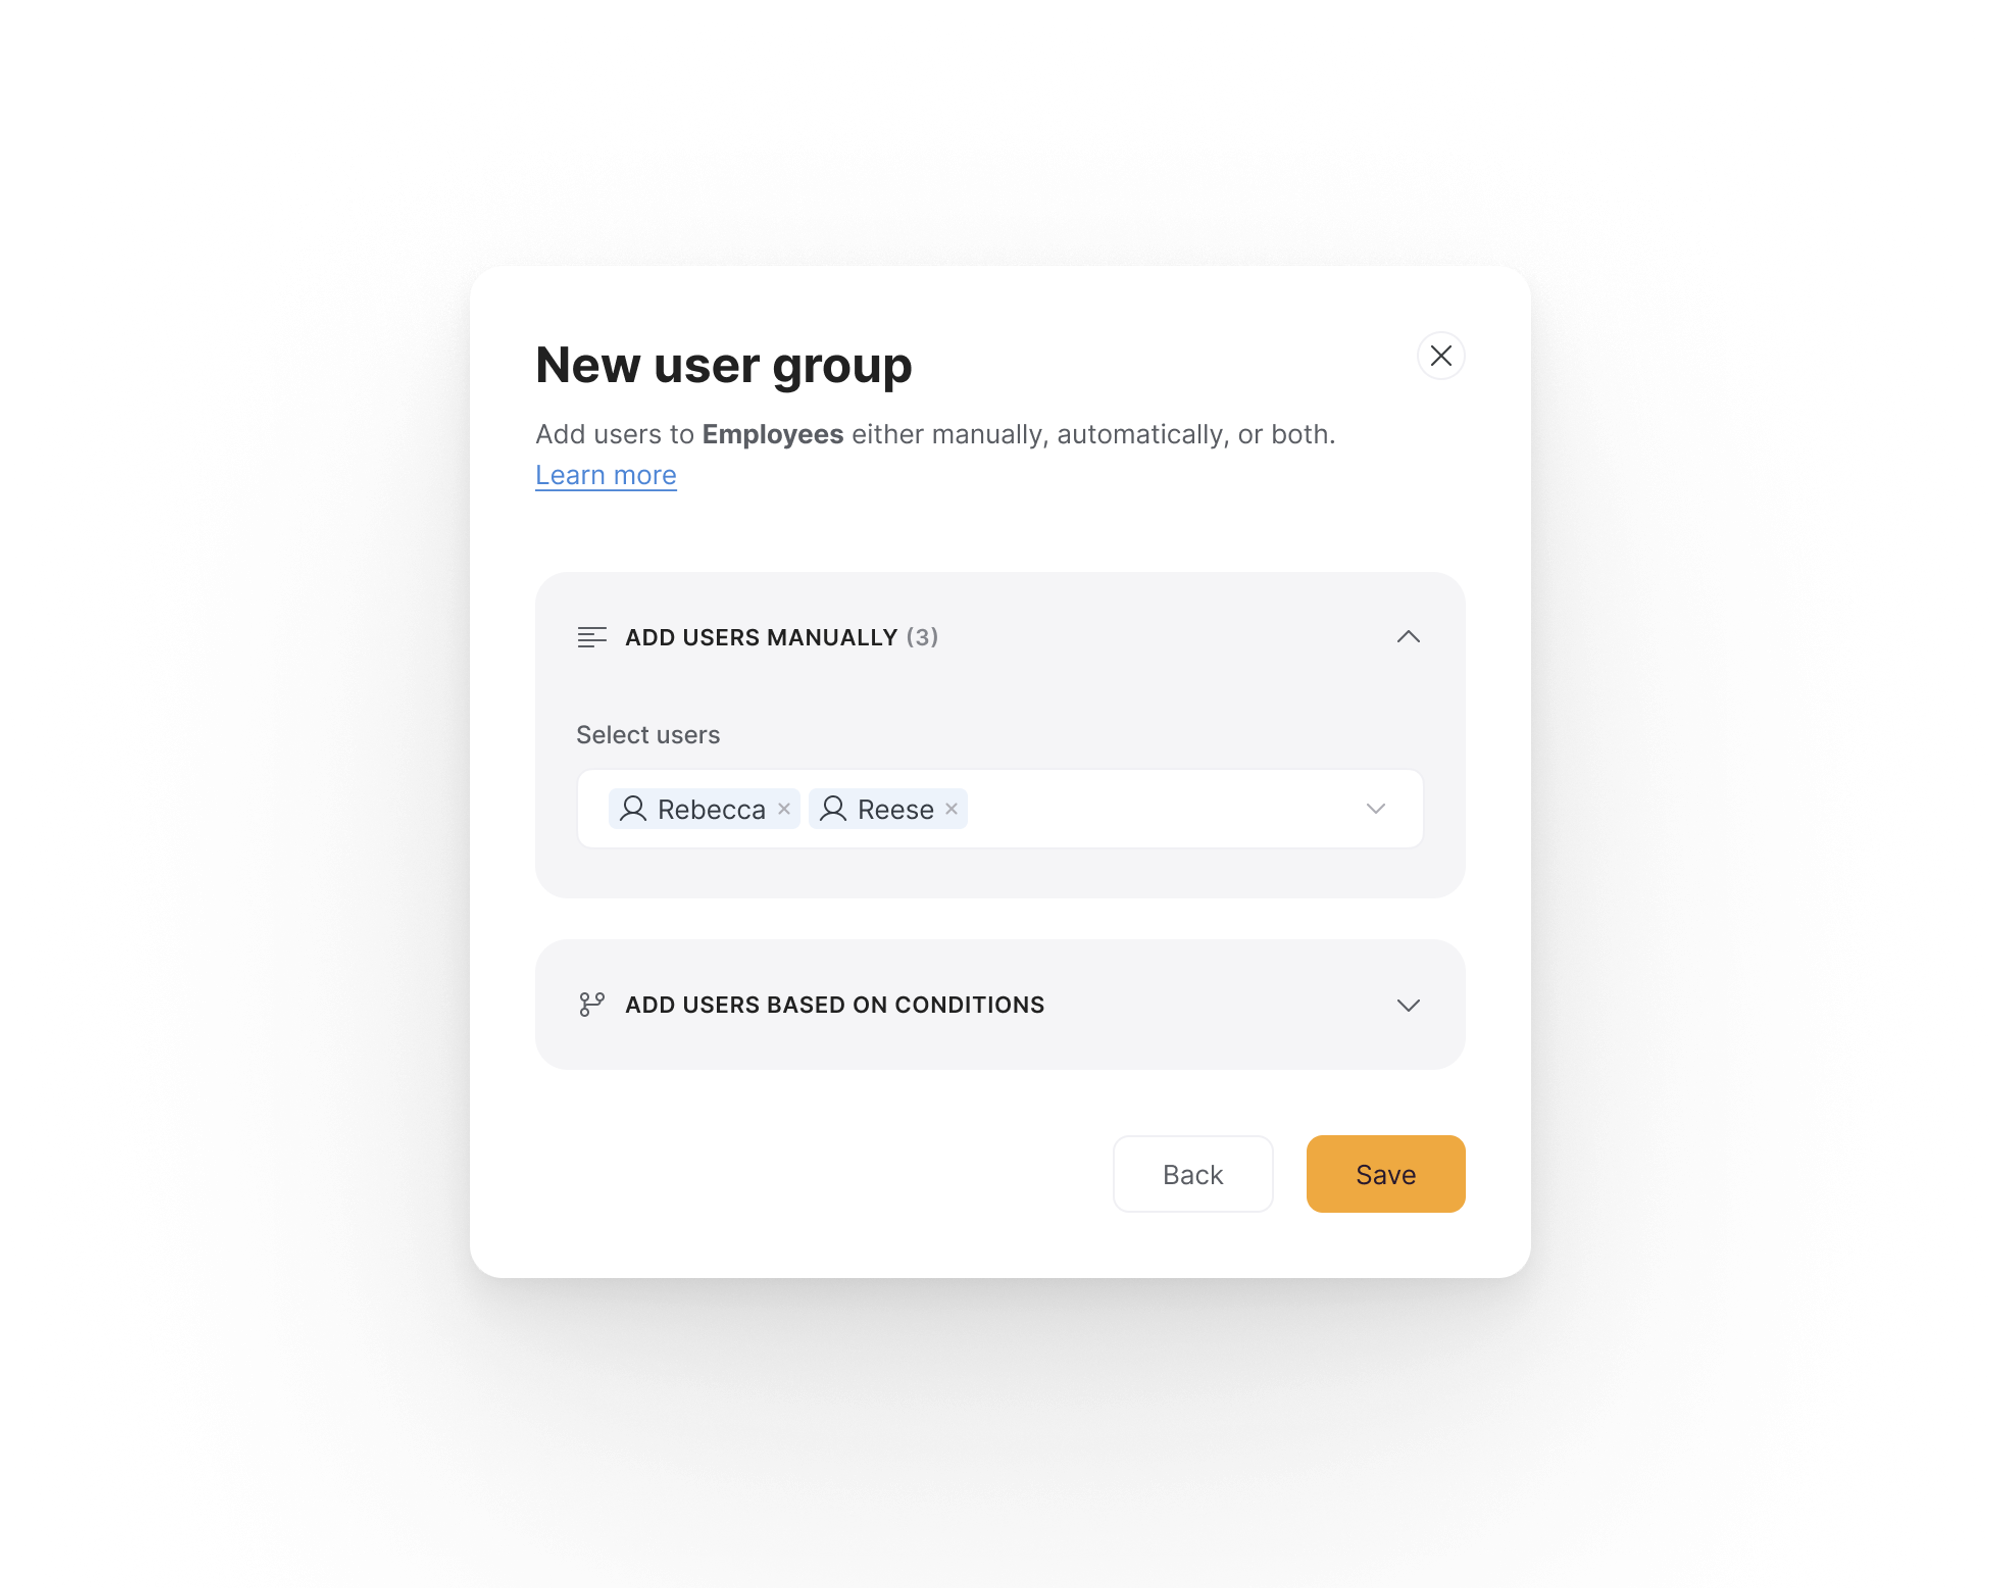 Add users manually to your new user group